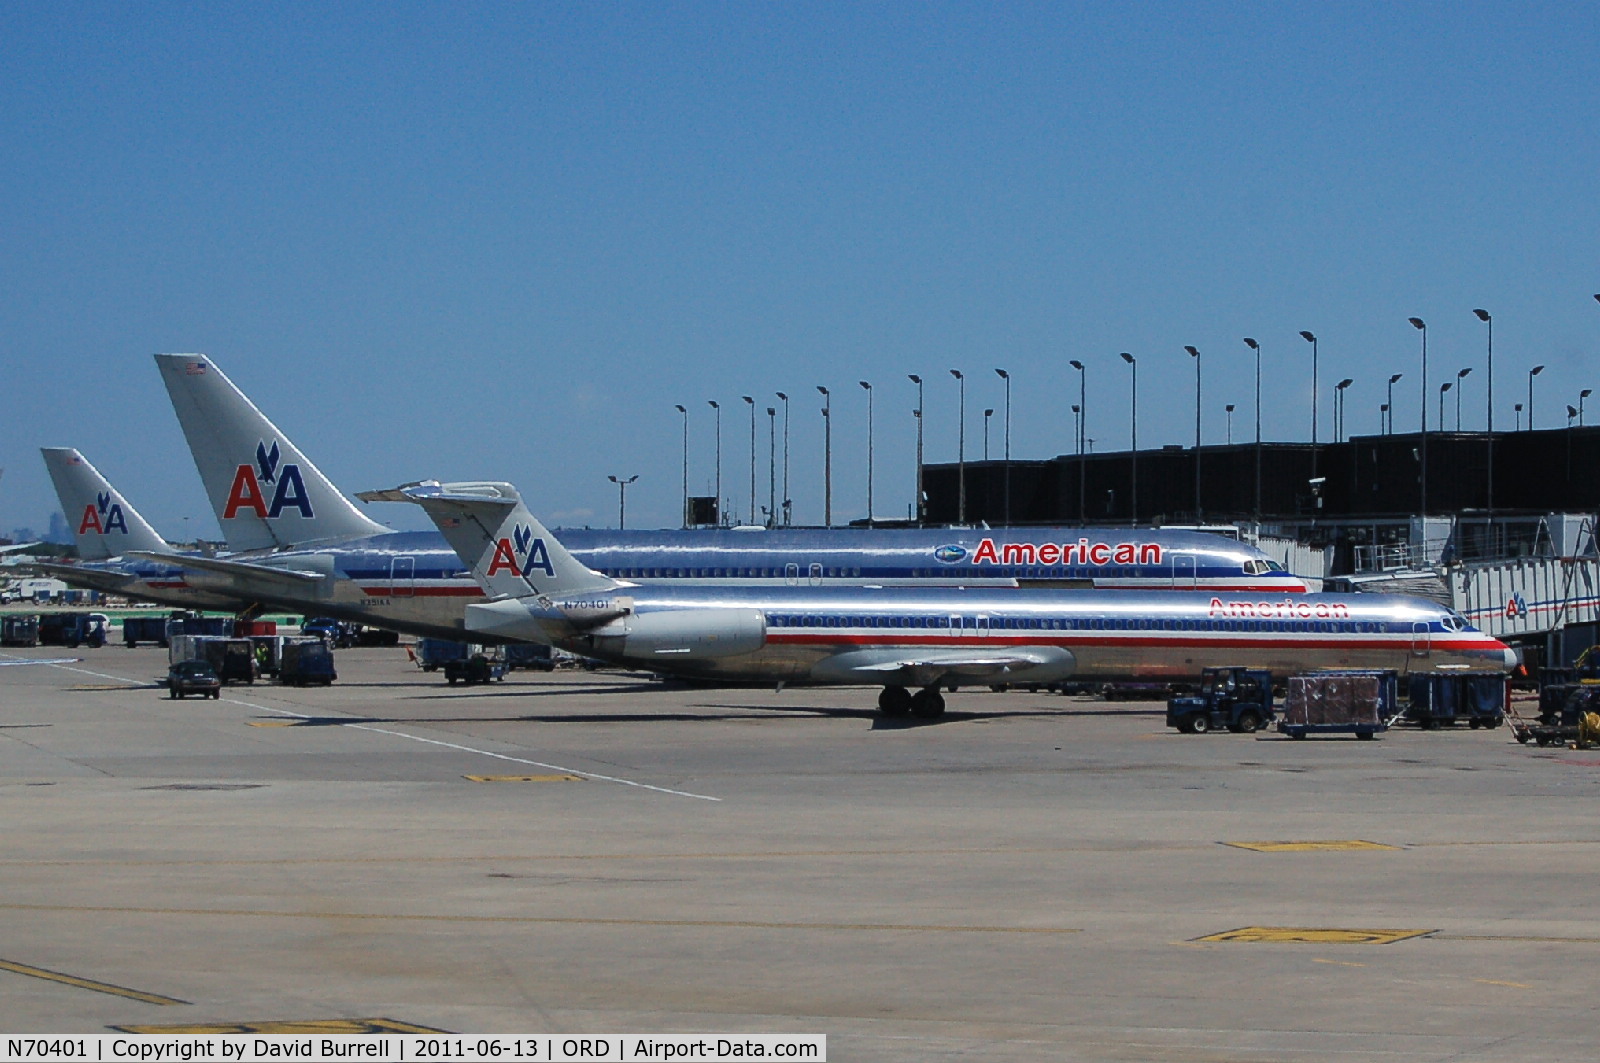 N70401, 1985 McDonnell Douglas MD-82 (DC-9-82) C/N 49312, American Airways MD 82 at Terminal 3 Chicago O'hare Airport.